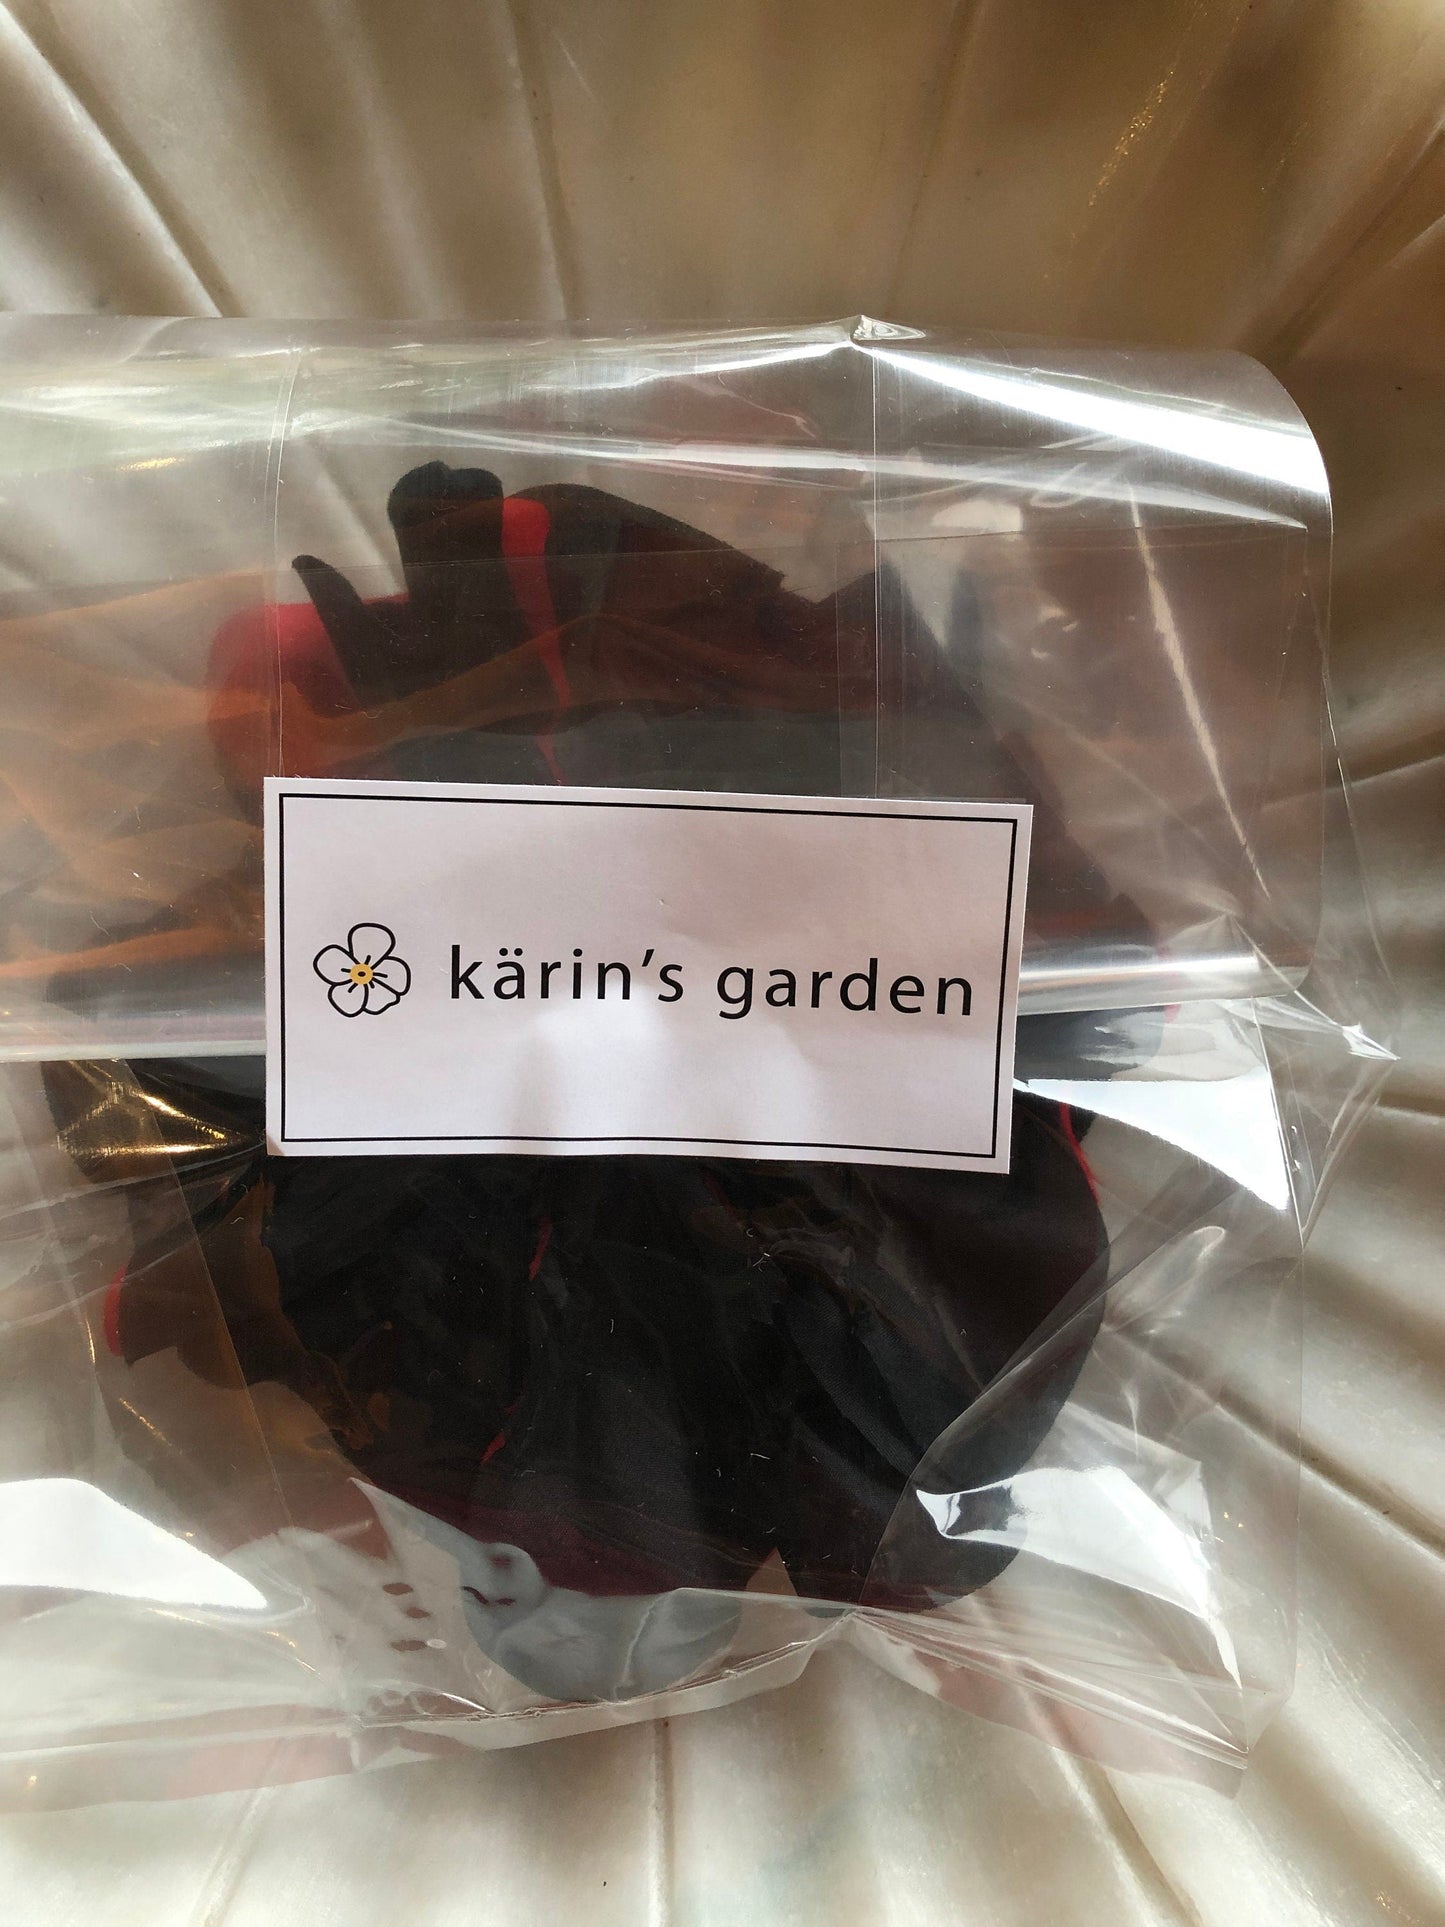 Karin's Garden Black/Red 4.5" Silk Poppy Pin or Clip for Hair.  Flower Pin. Brooch.  Hair Accessory. Moulin Rouge.  Derby